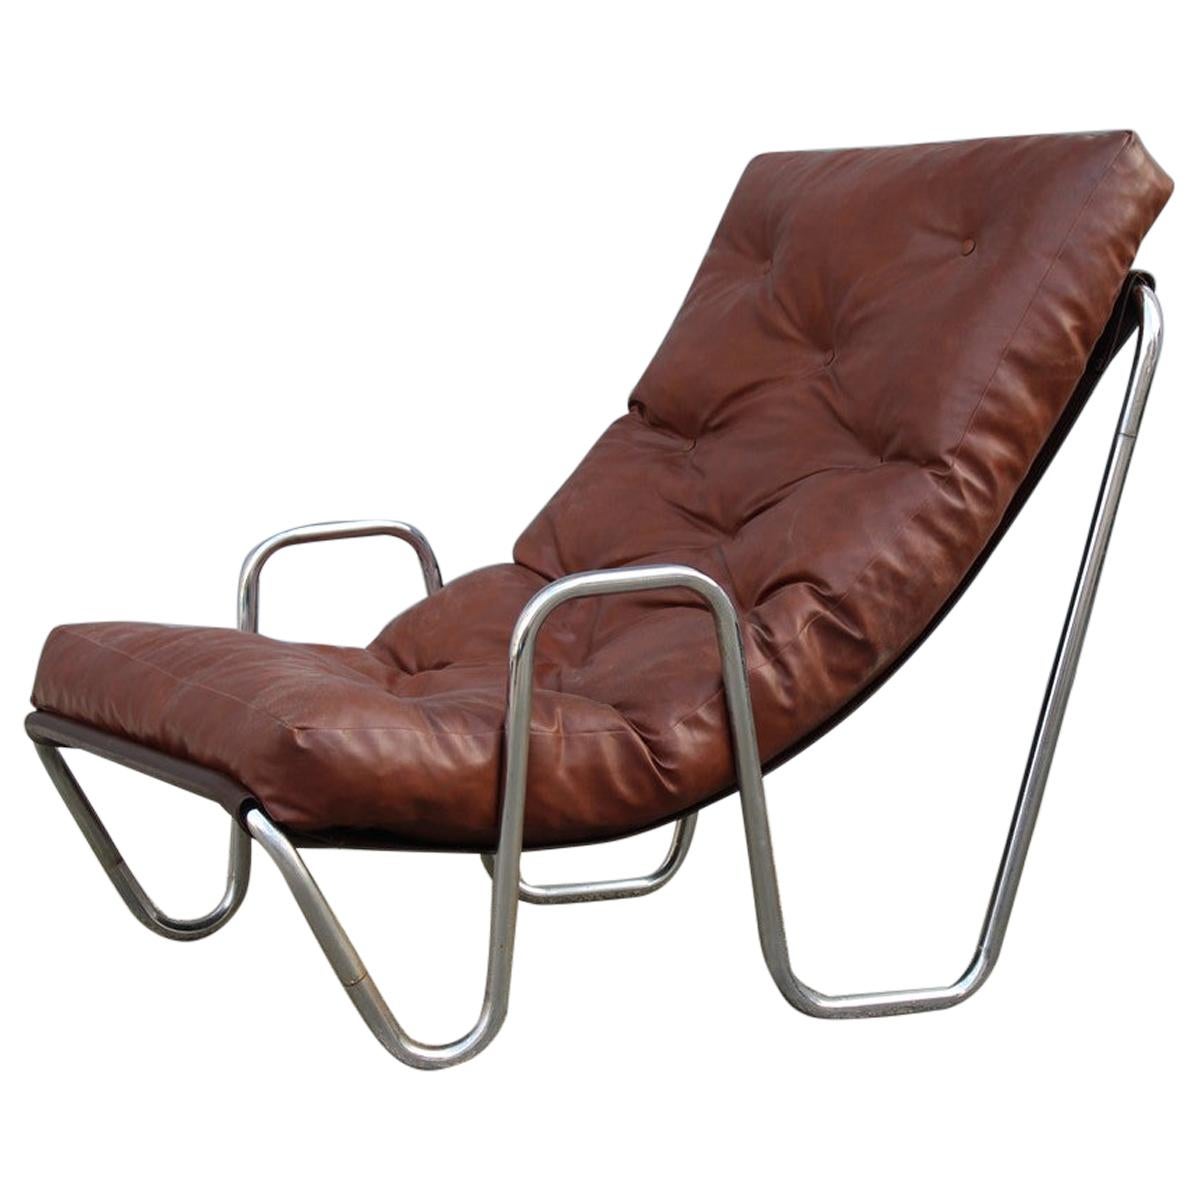 Low Armchair Minimal Italian Design Cromed Metal Faux Leather, 1970s For Sale